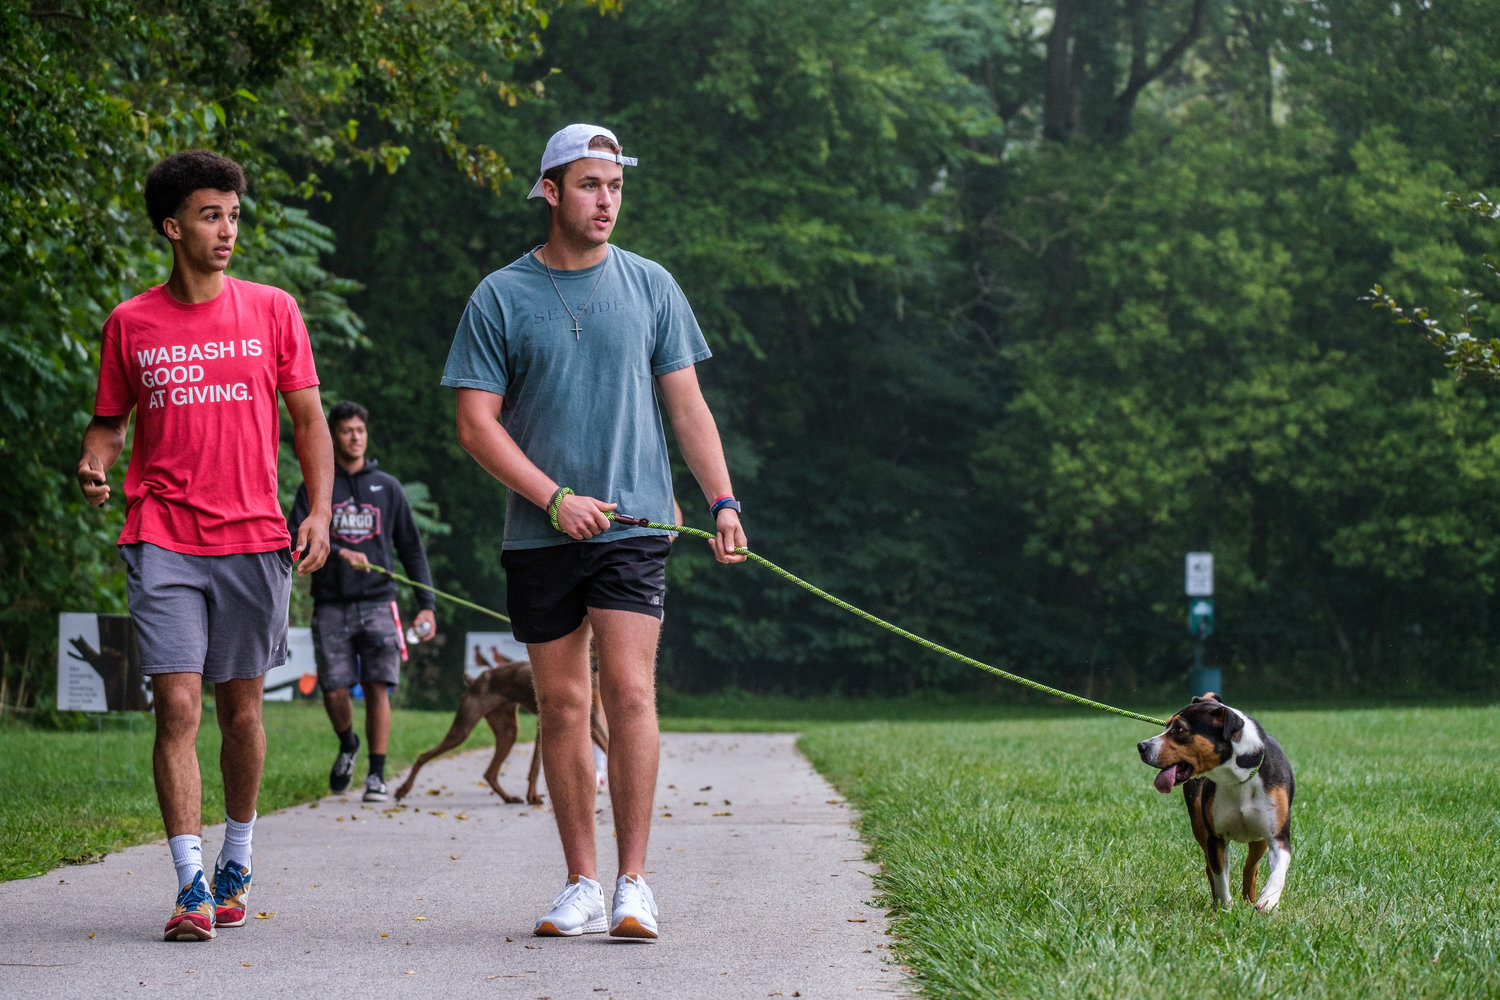 Students also volunteered by walking dogs at the Animal Welfare League of Montgomery County.